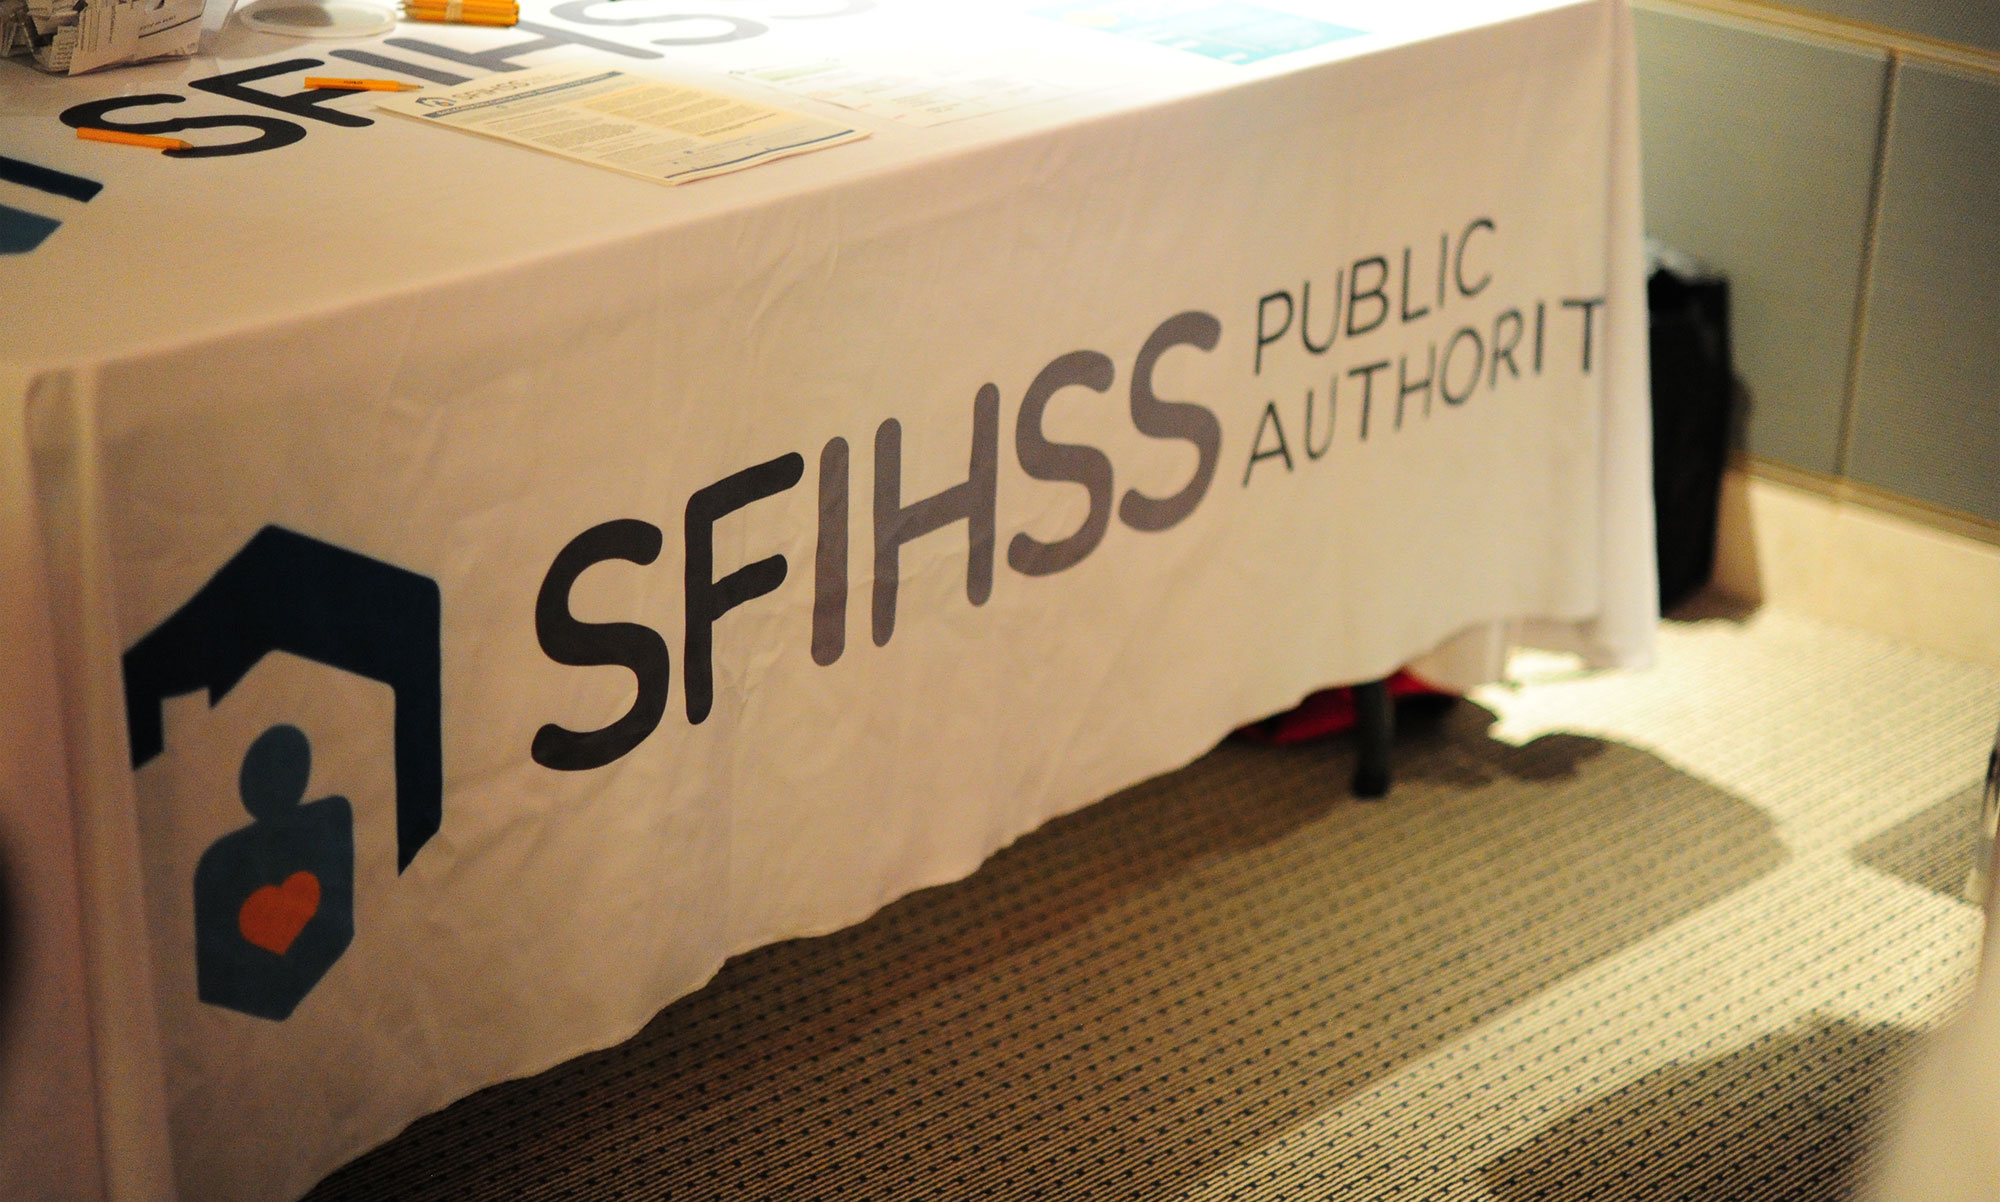 Photo of a trade show table with the SFIHSSPA logo